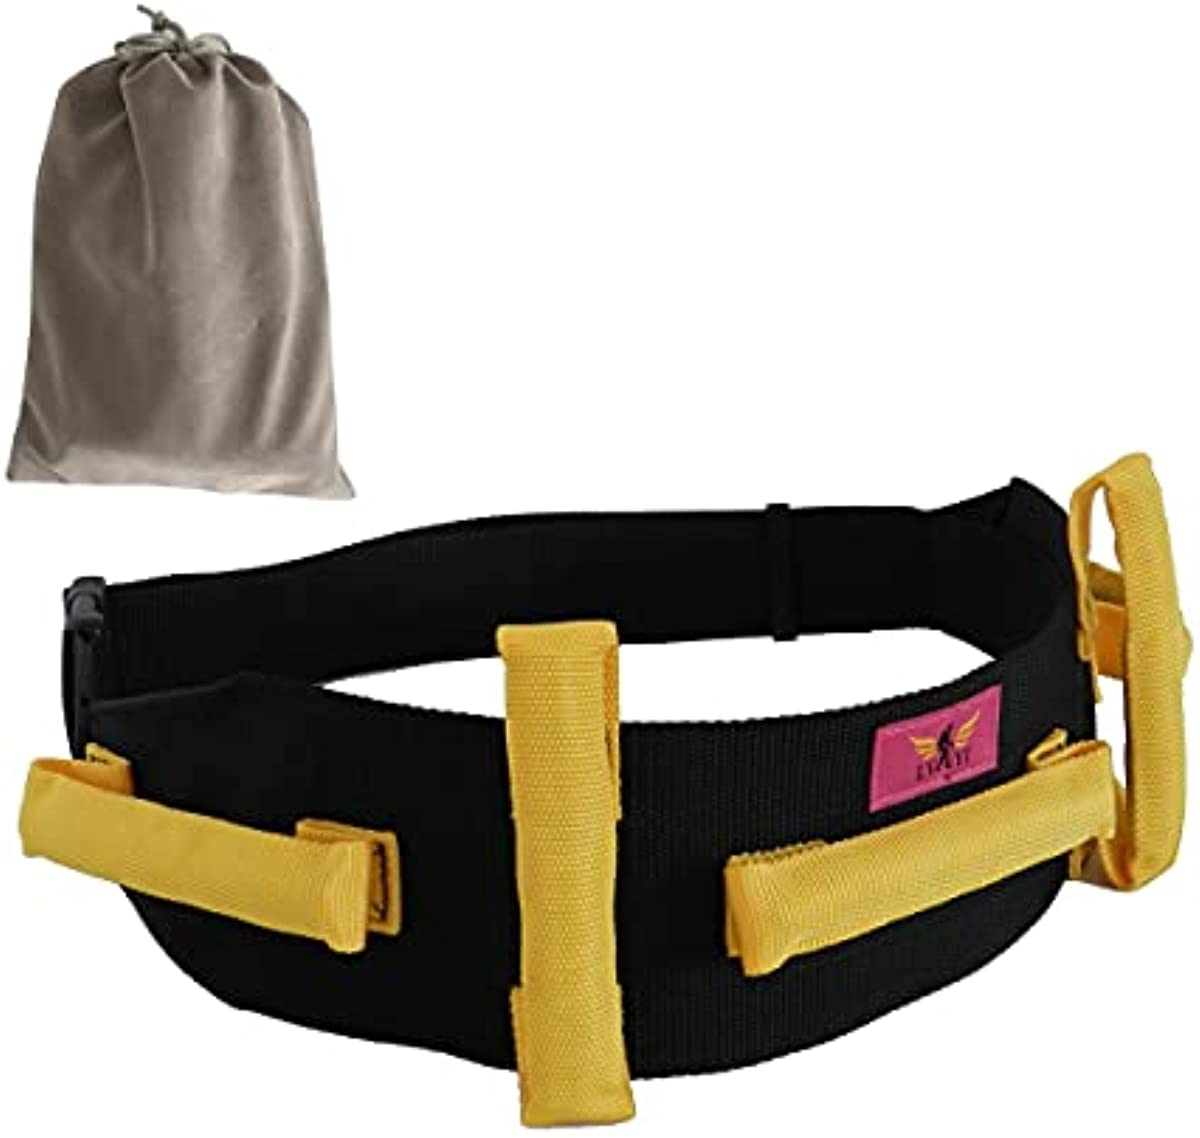 TripWing Transfer Gait Belt with Handles and Quick Release Buckle - Elderly Patient Walking Ambulation Assist Mobility Aid (55\" L x 4\" W, Solid Handle)